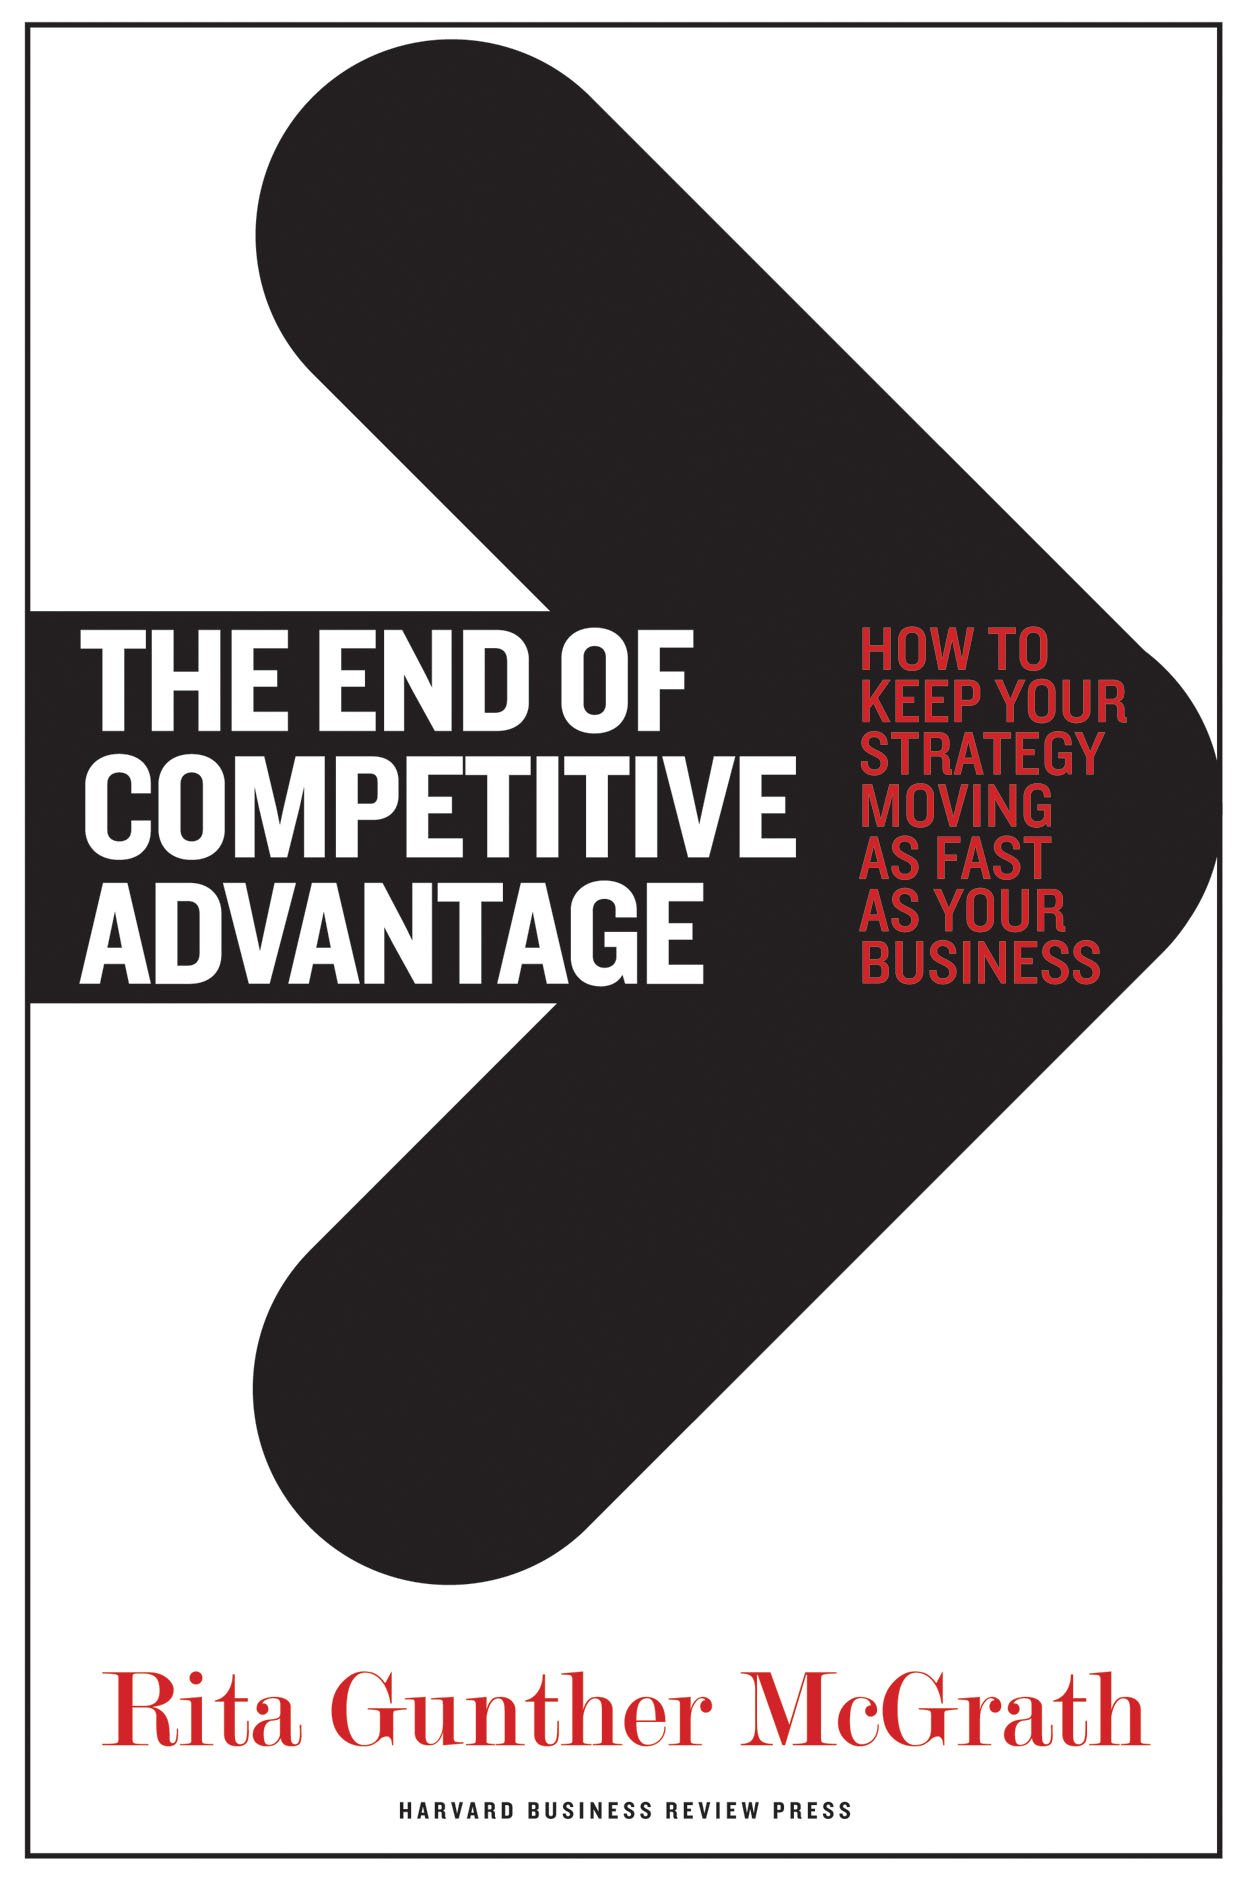 The End of Competitive Advantage: How to Keep Your Strategy Moving as Fast as Your Business